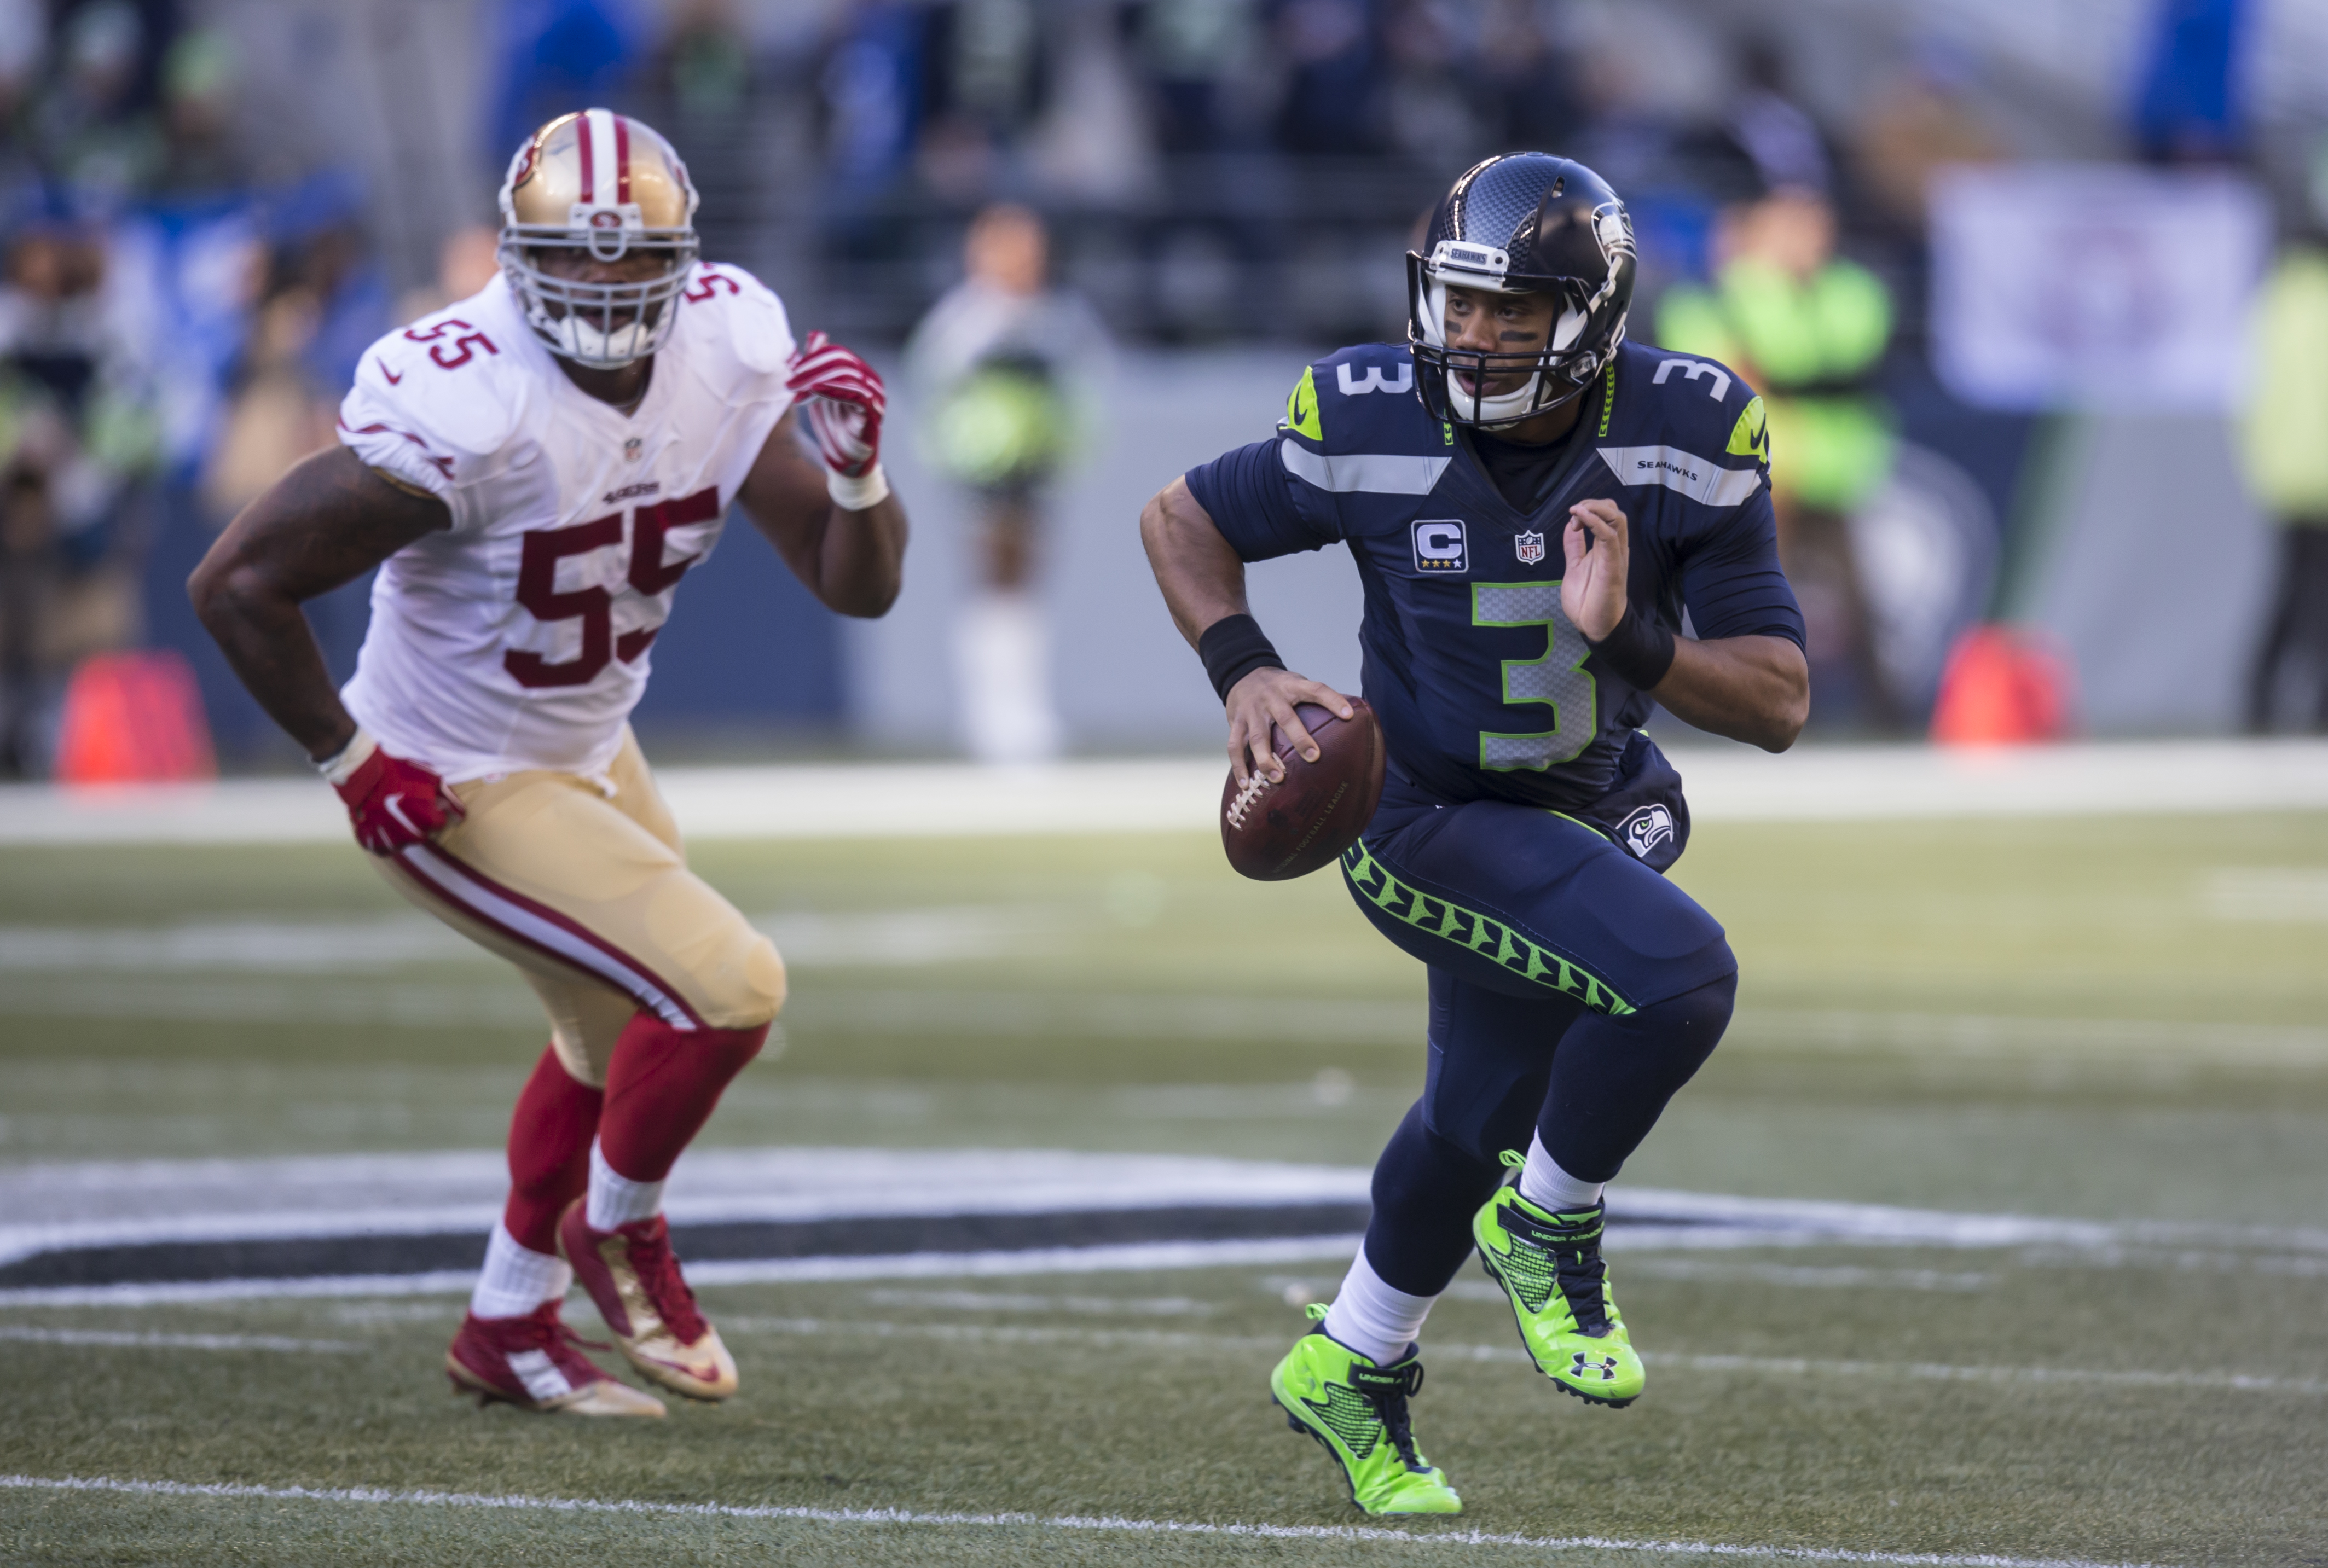 seahawks vs 49ers today